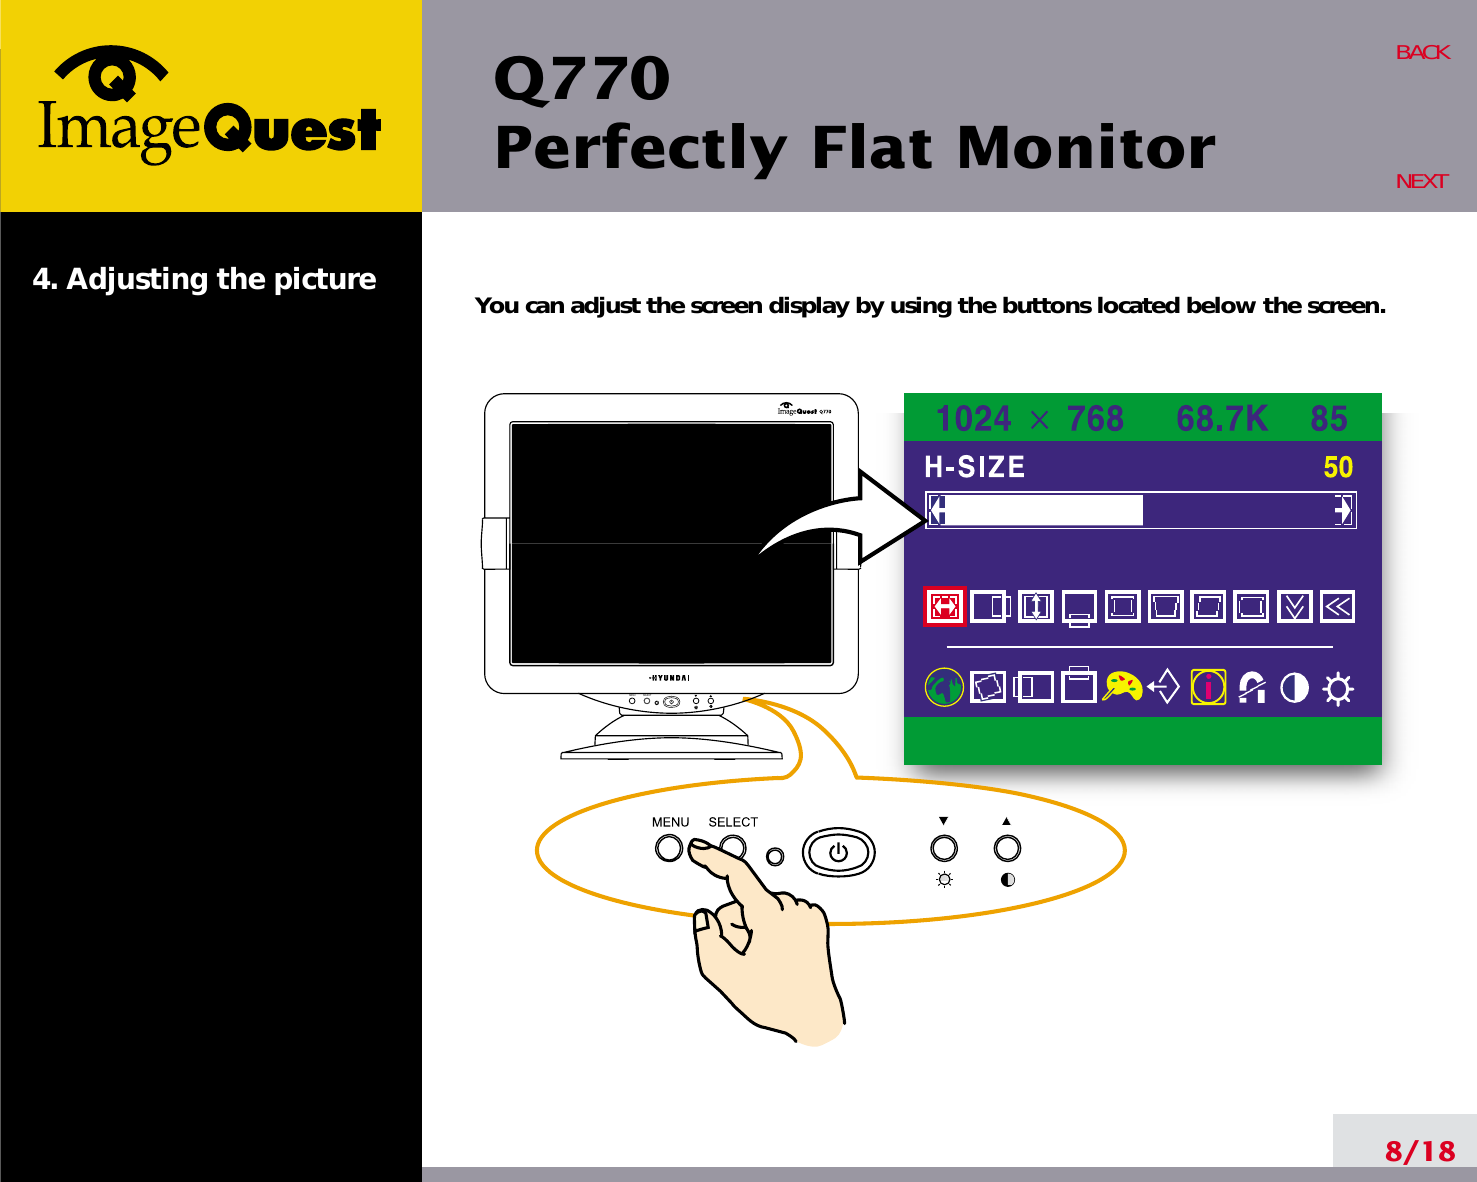 Q770Perfectly Flat Monitor8/18BACKNEXT4. Adjusting the picture You can adjust the screen display by using the buttons located below the screen.MENU SELECT